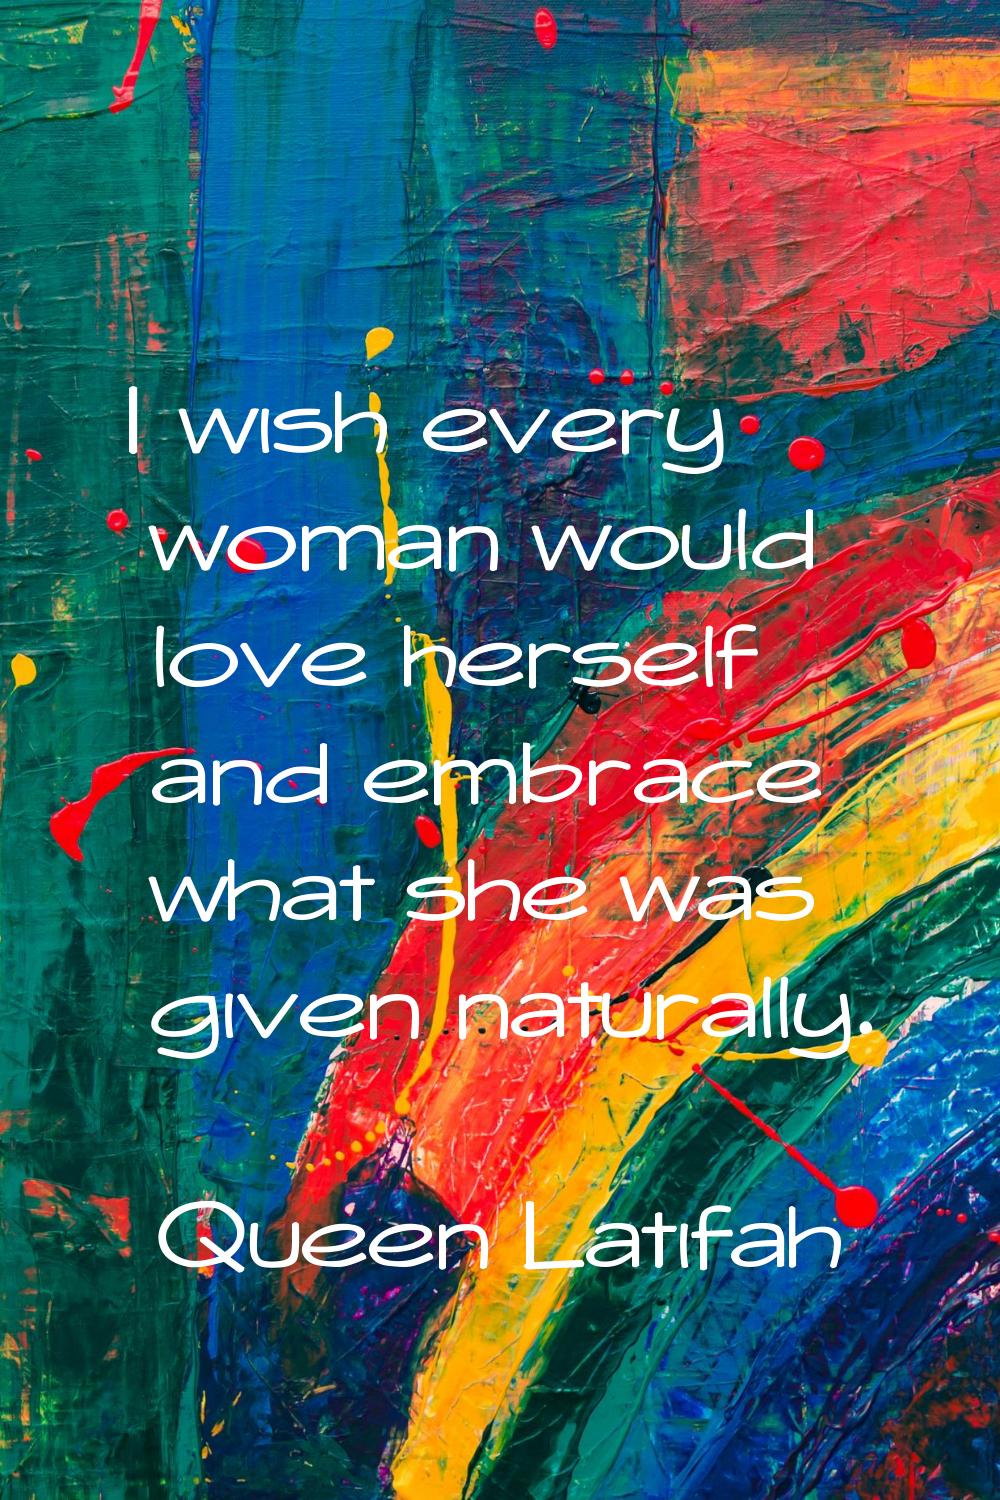 I wish every woman would love herself and embrace what she was given naturally.